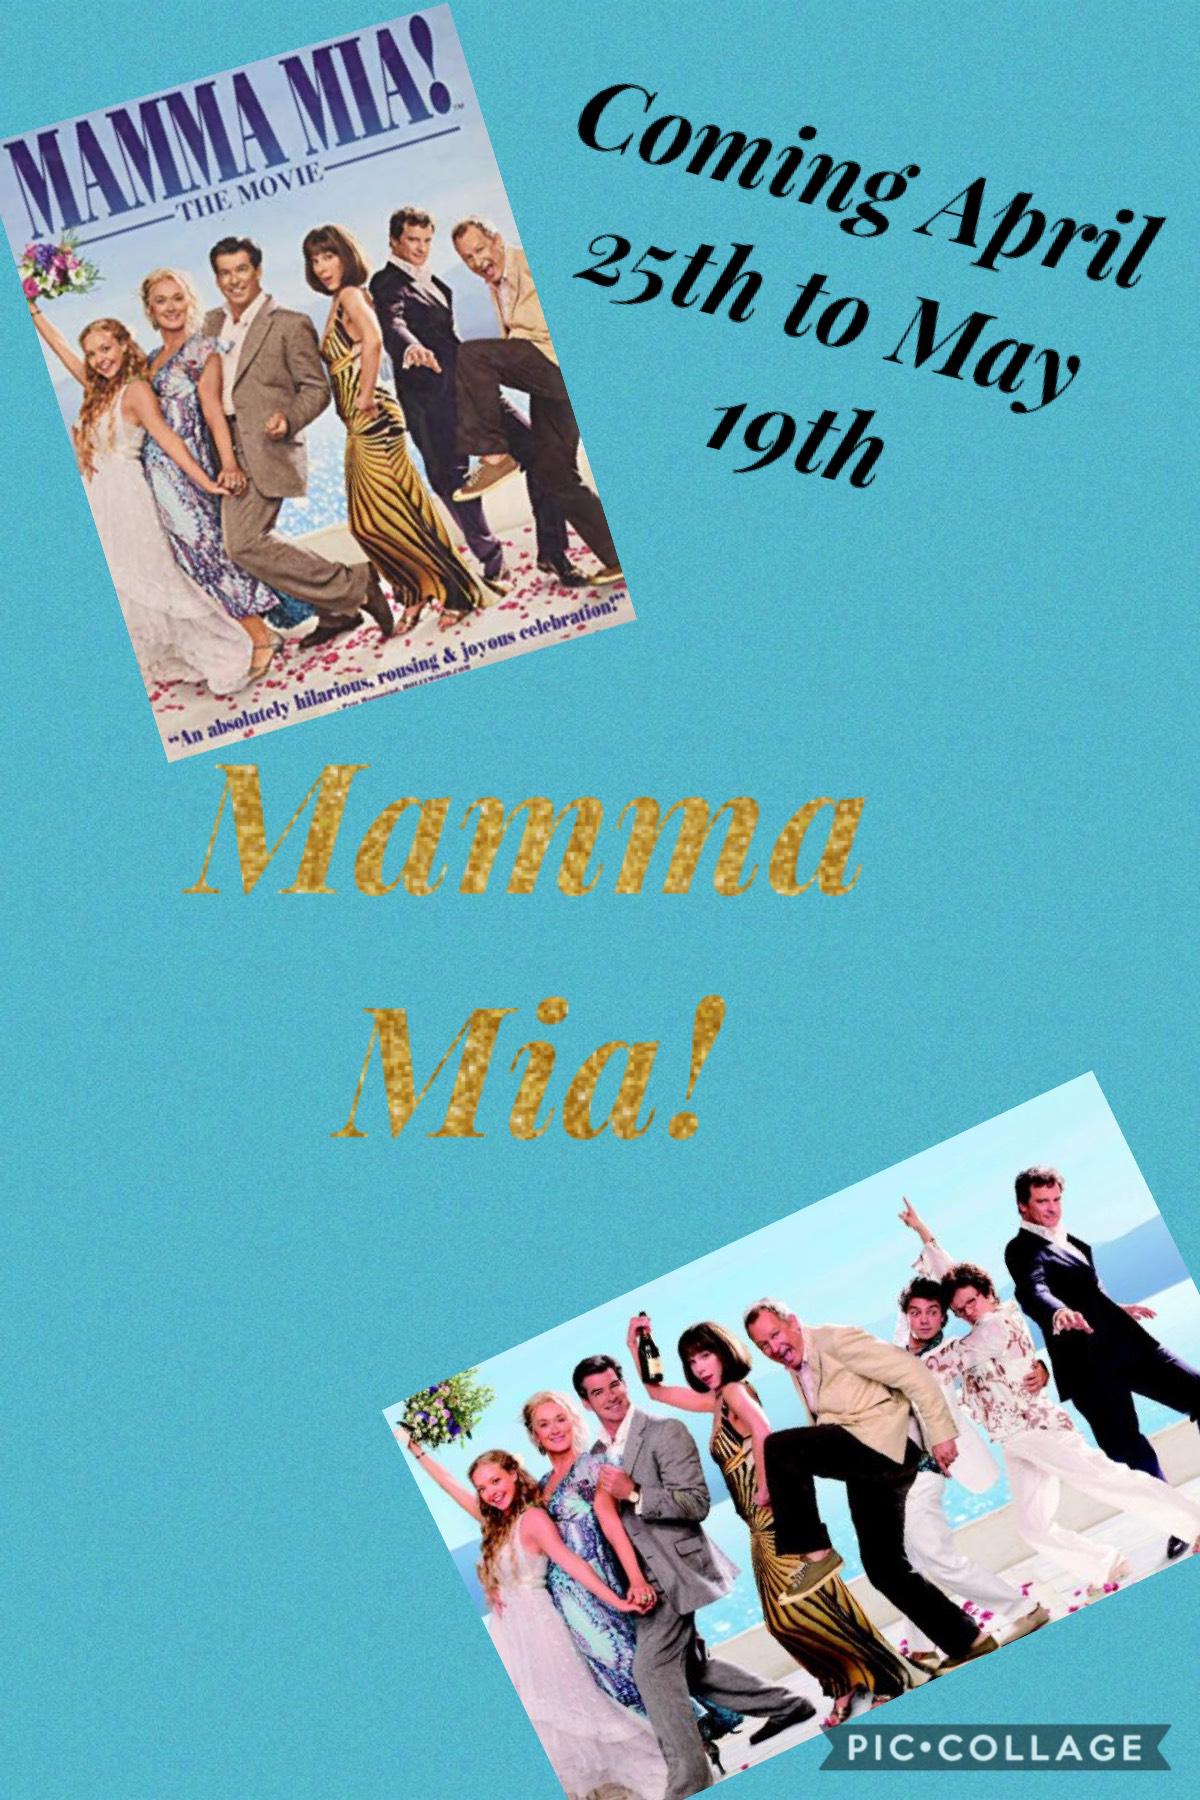 Mamma Mia the play coming to Kansas City, go to https://secure.mammamiakc.com to get tickets!